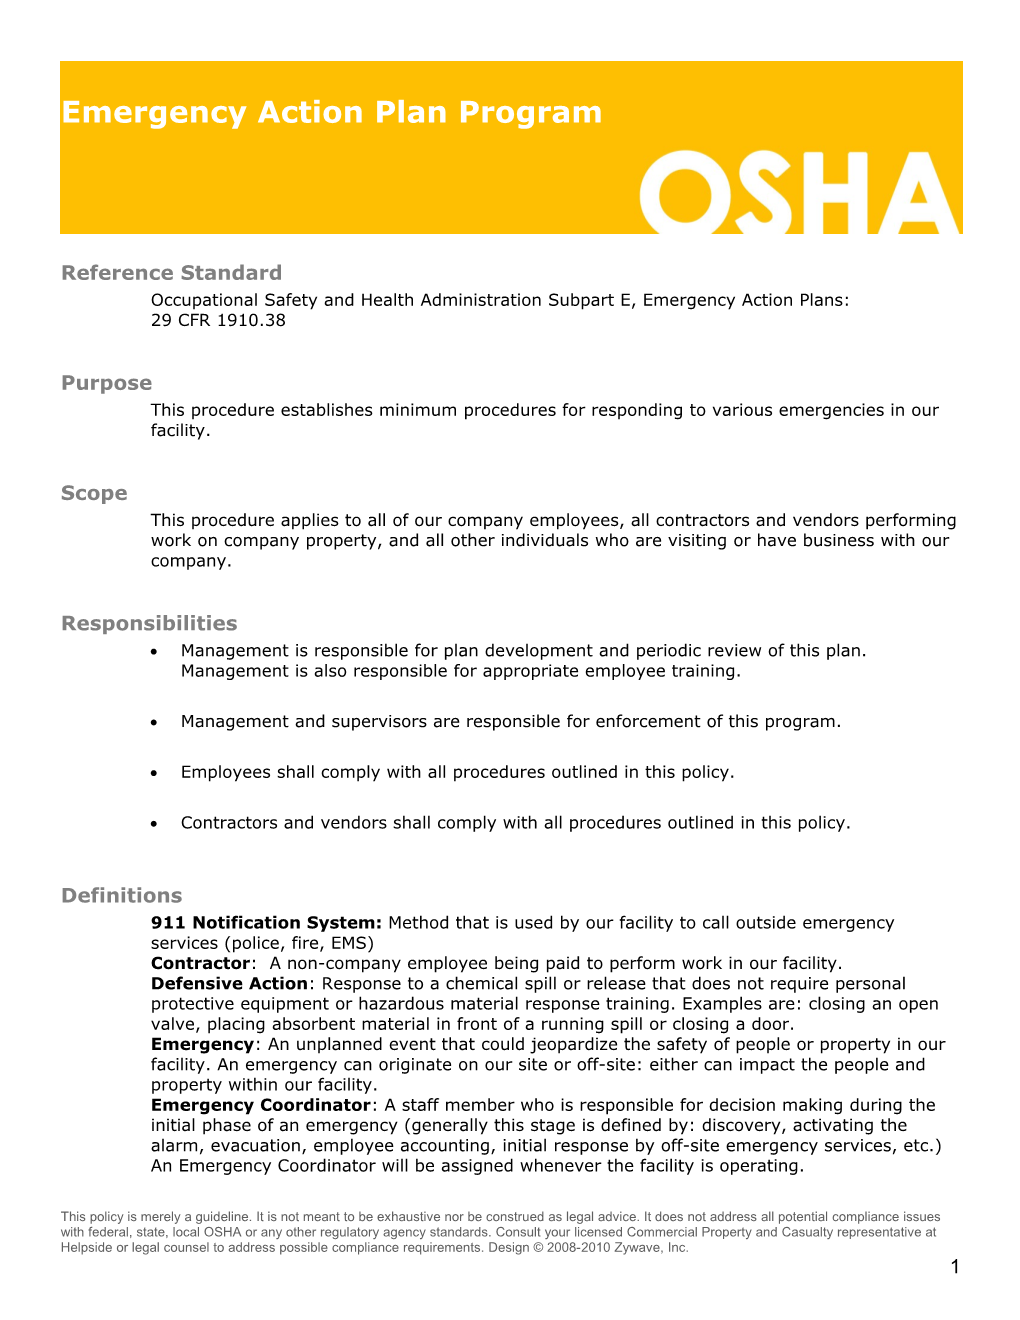 Occupational Safety and Health Administration Subpart E, Emergency Action Plans